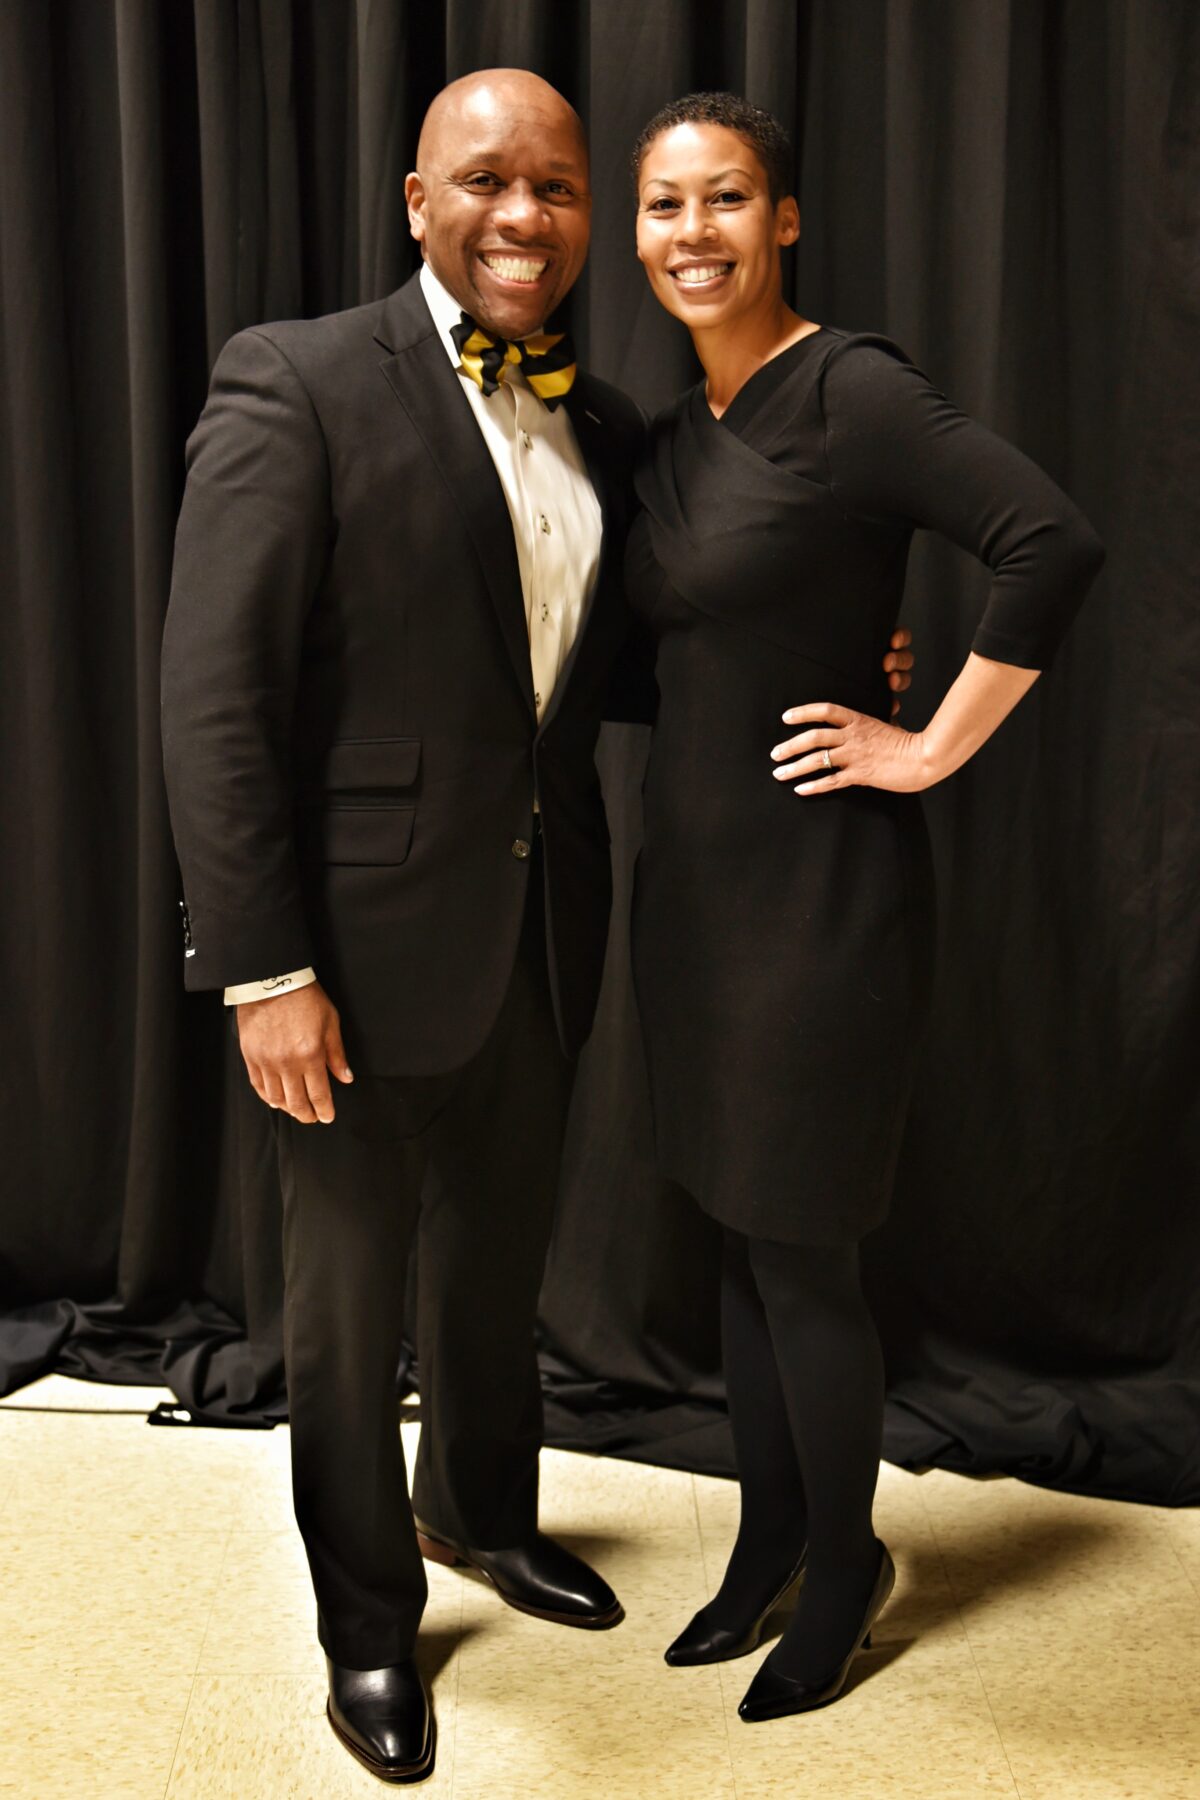 Kevin and Kim McDonald dressed in black for the closing of the Big XII Conference.